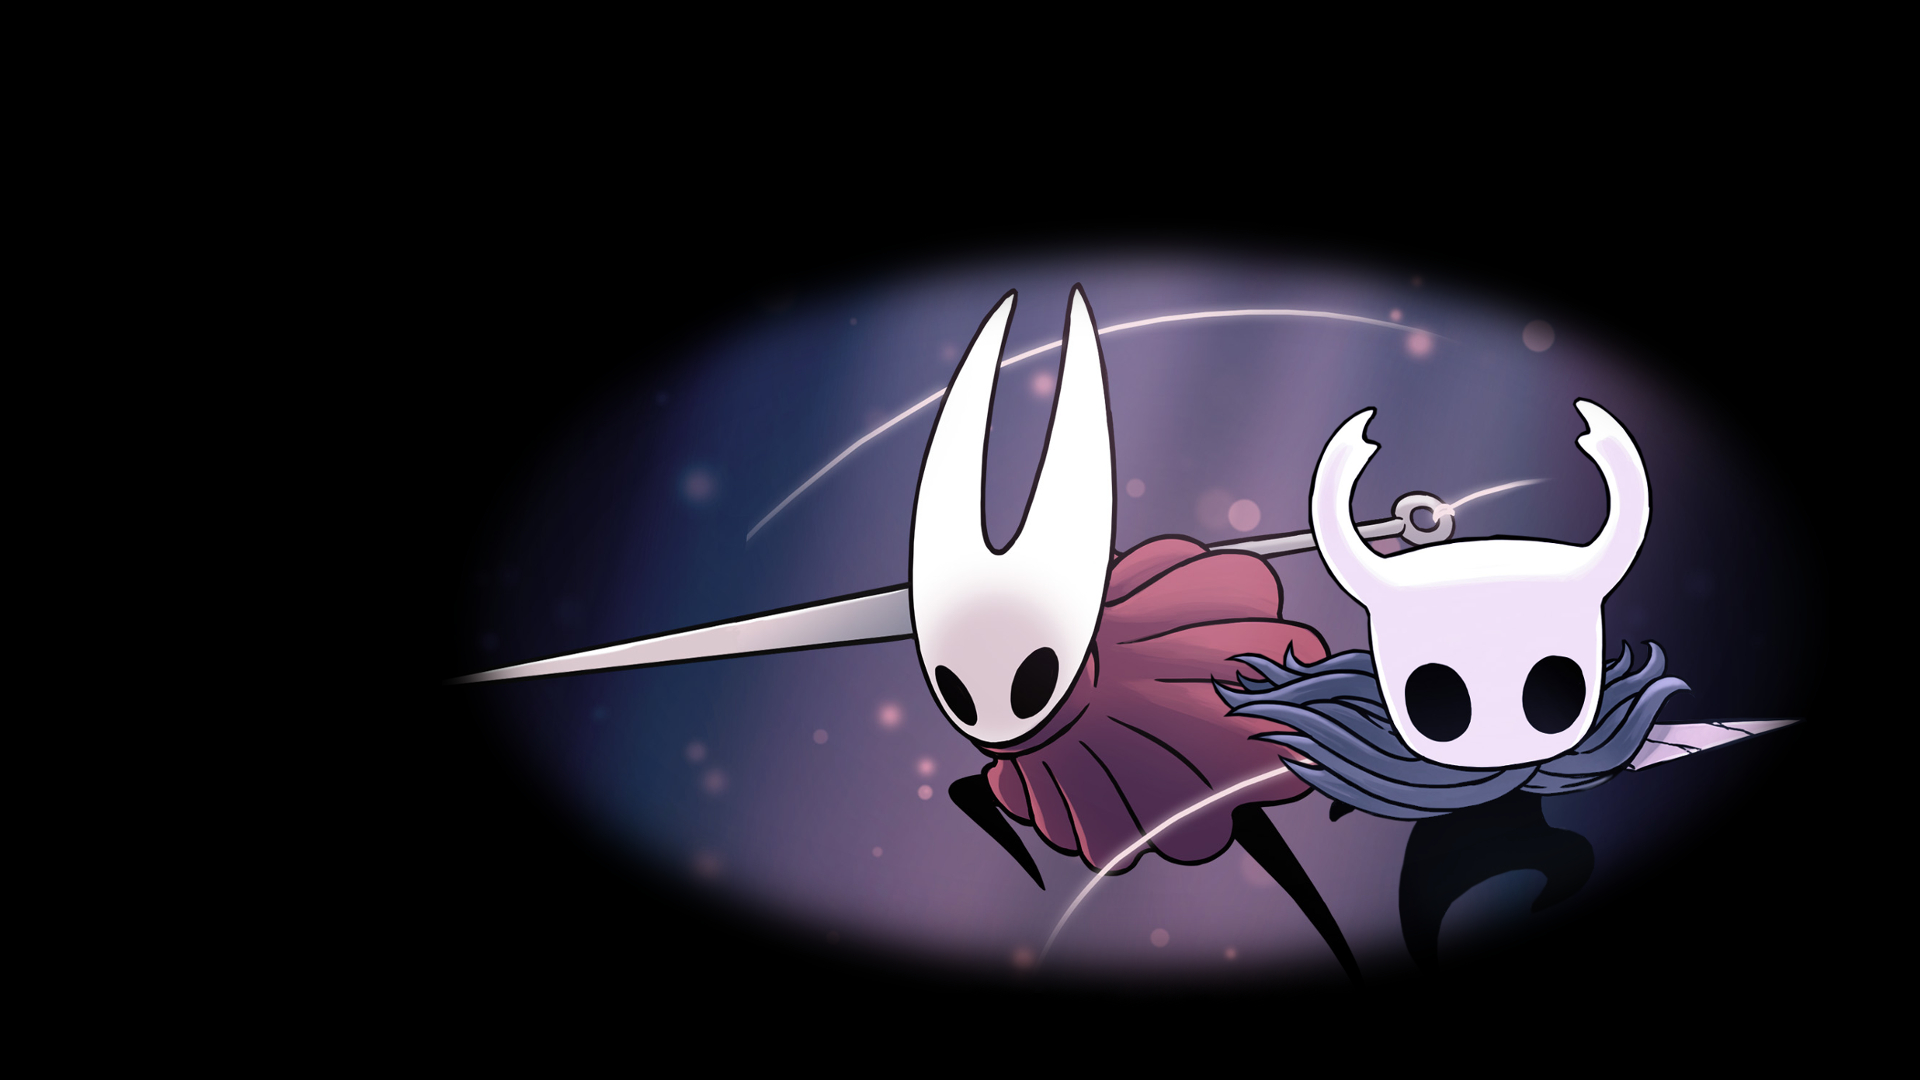 Hollow Knight and Hornet by nightmare2828